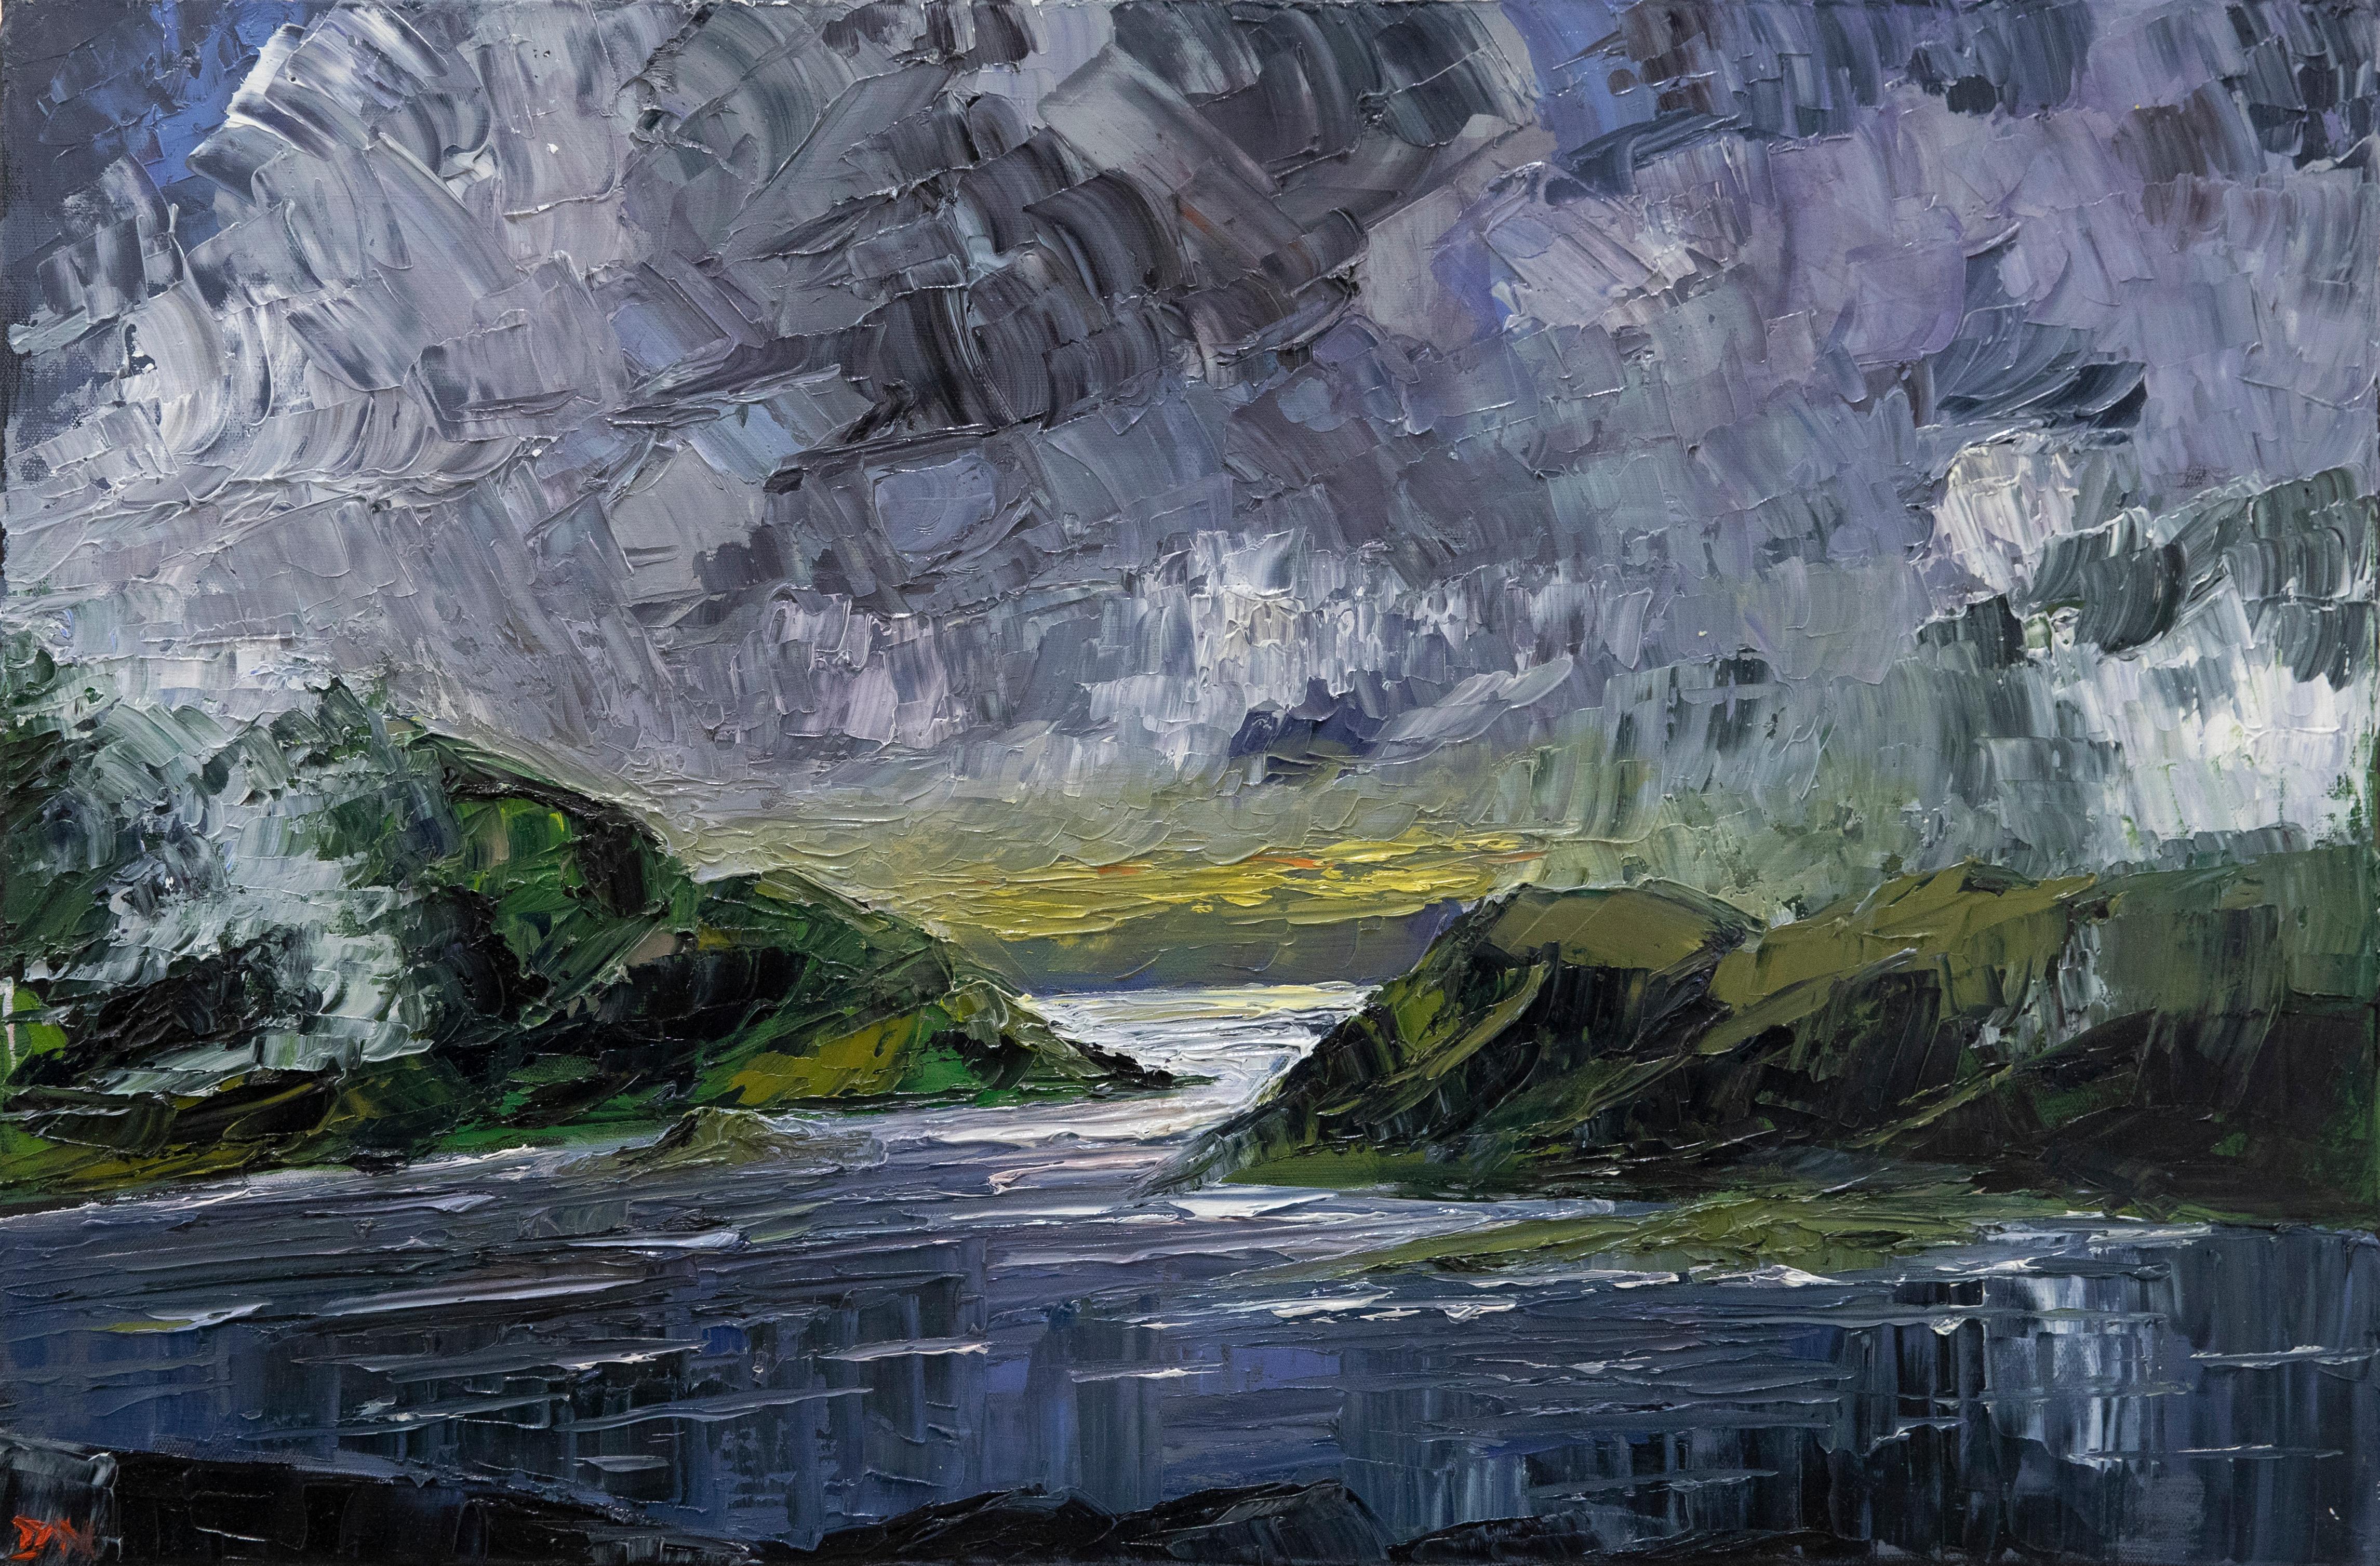 A charming depiction of Loch Restil in the highlands of Scotland. The artist uses a dynamic impasto technique to capture the atmospheric sunset over the picturesque landscape. Signed to the lower left. On canvas.
